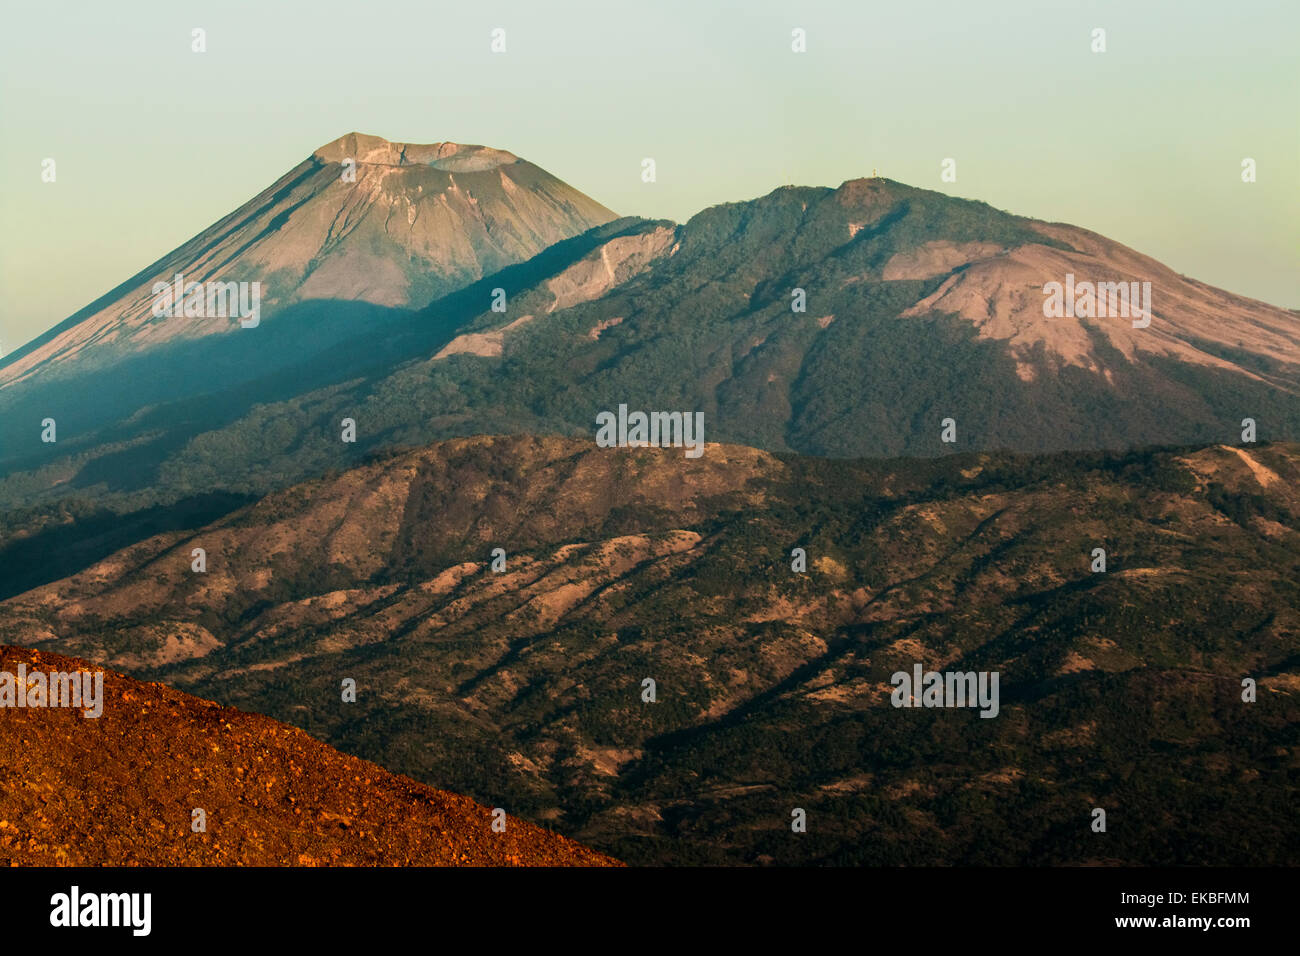 Summit of 1745m active Volcan San Cristobal on left and Volcan Casita on the right, Chinandega, Nicaragua Stock Photo